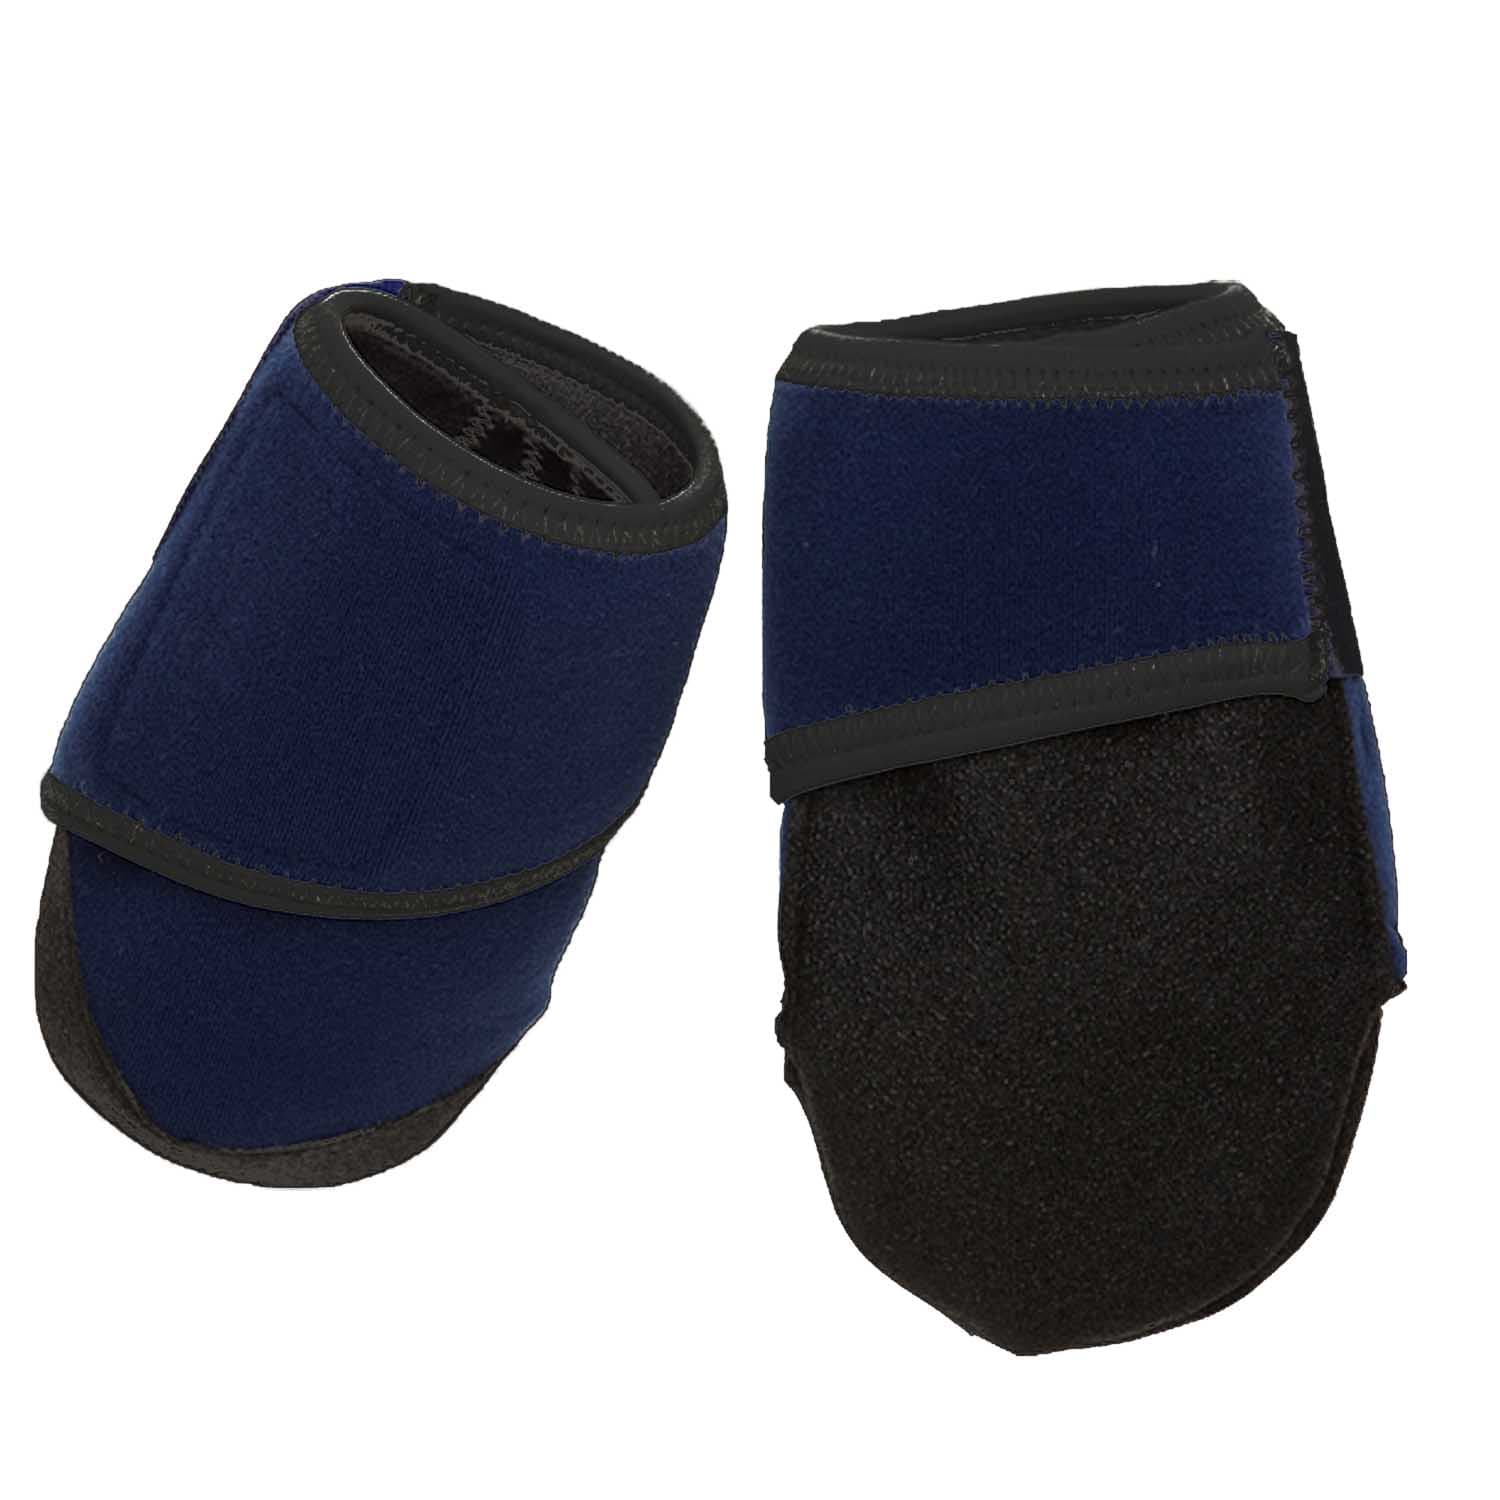 HEALERS Medical Dog Boots with Gauze Pads